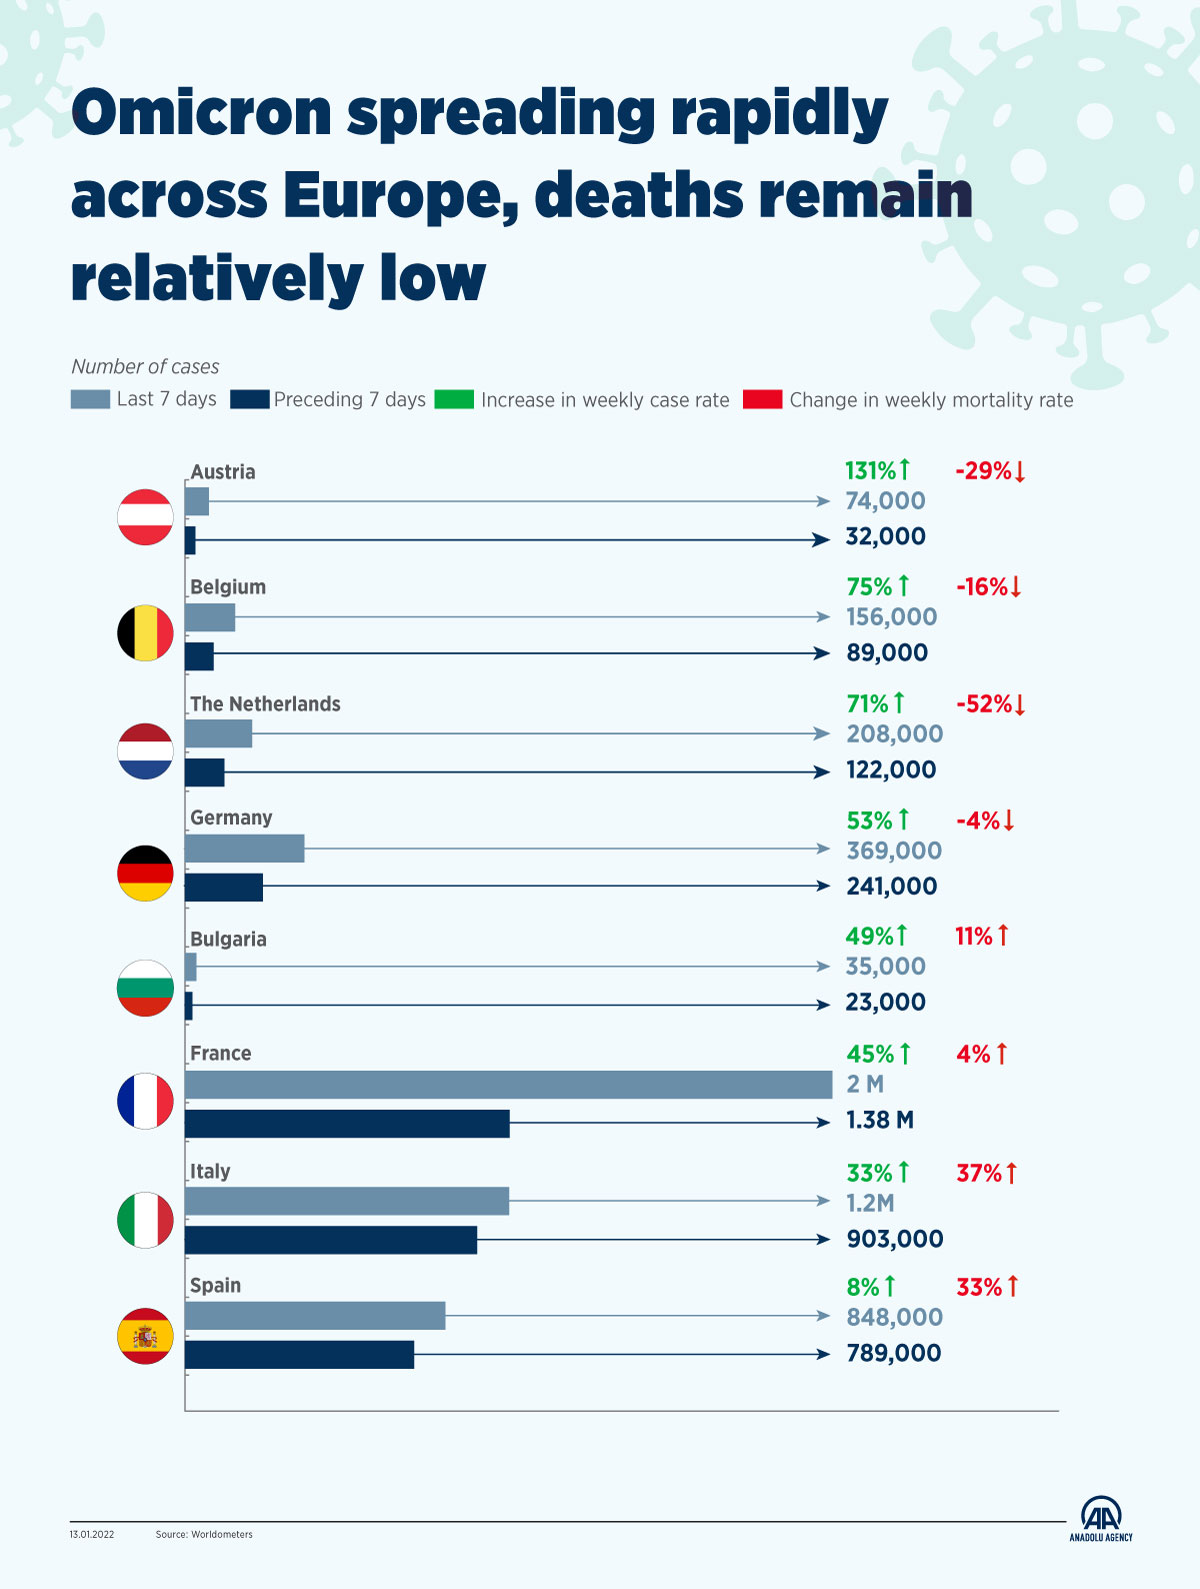 Omicron spreading rapidly across Europe, deaths remain relatively low